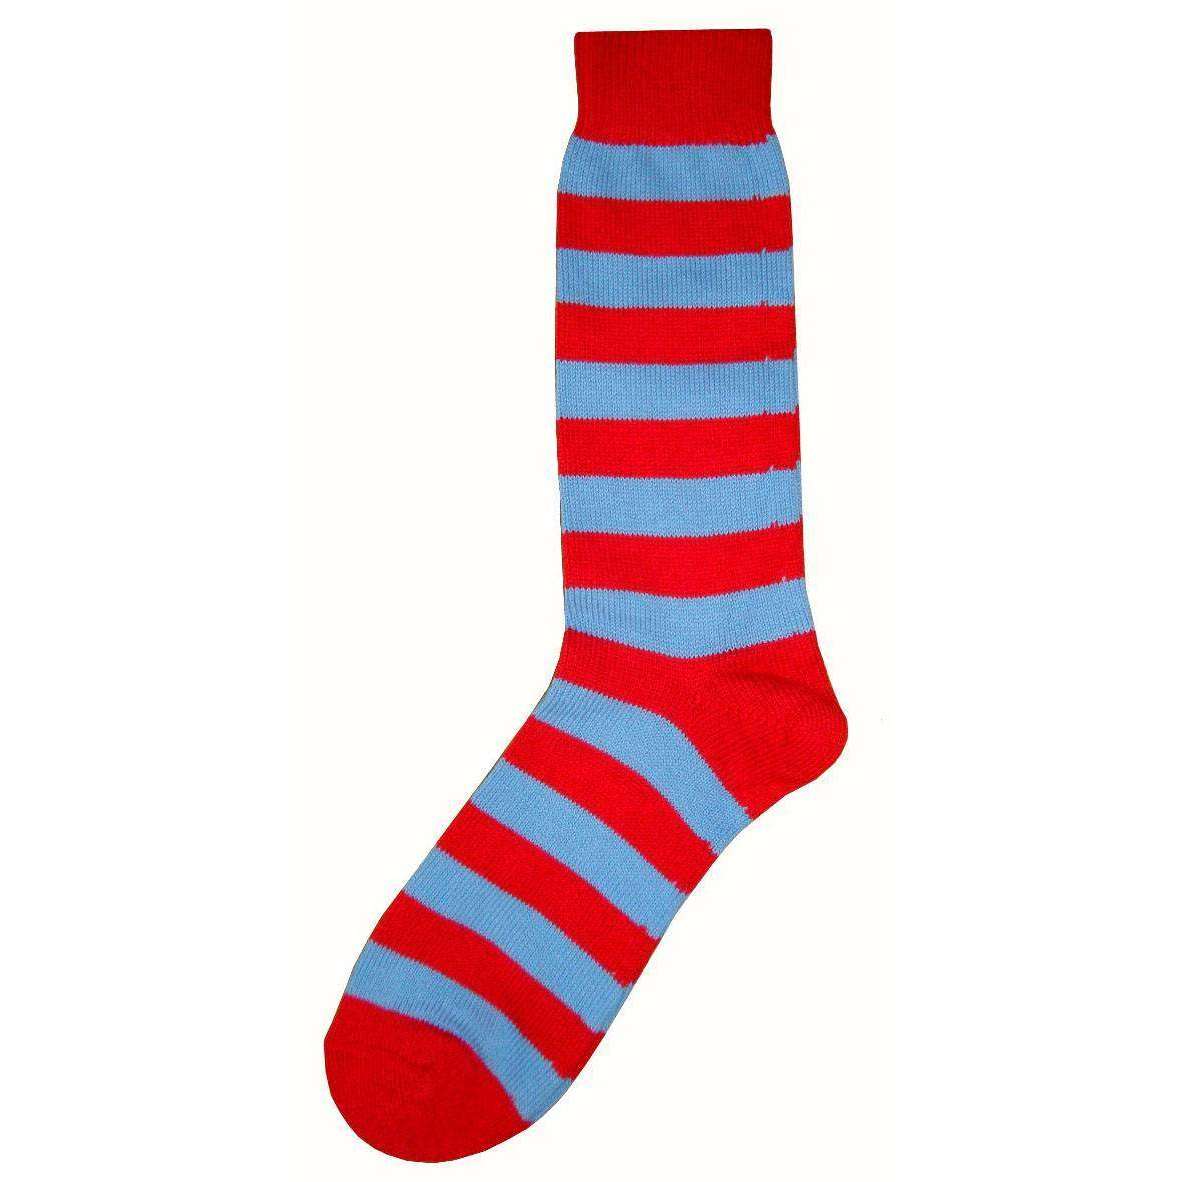 Bassin and Brown Striped Midcalf Socks - Red/Blue